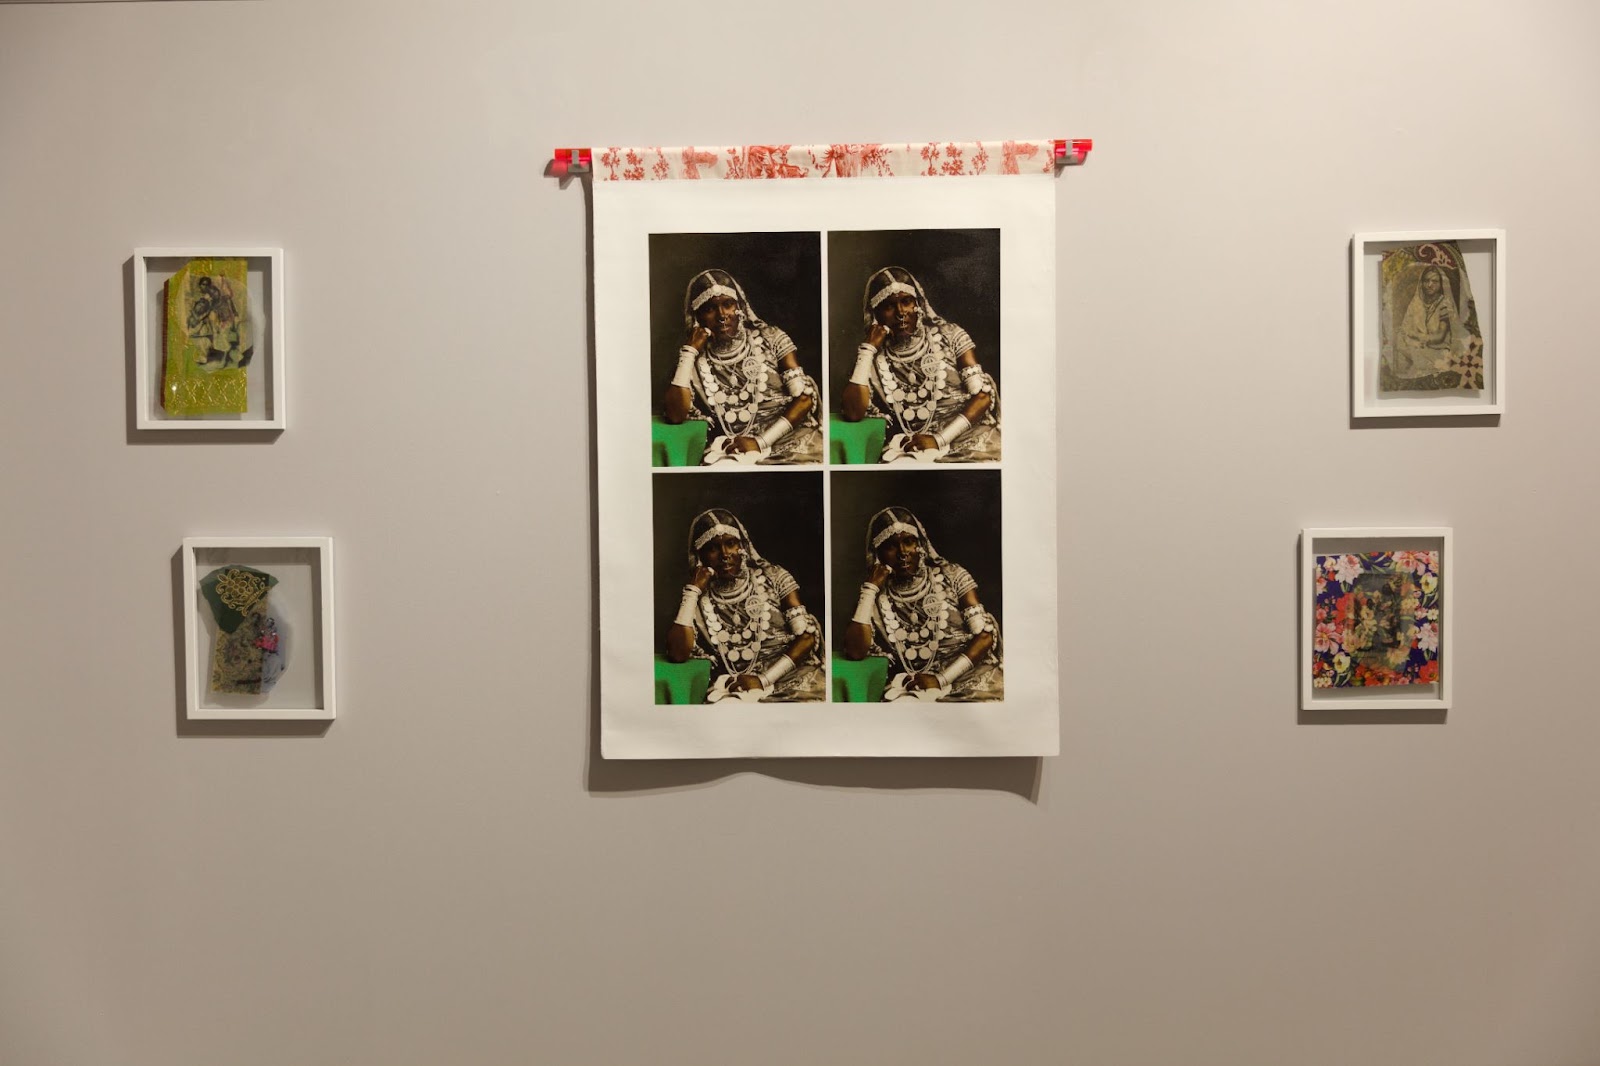 Image: Renluka Maharaj’s works: Amaya (2022) in the center, four copies of a vintage photograph with certain parts edited with ink and fabric. Clockwise around it in smaller frames are Myra (2022), Divya and Deepa (2022), Kavi with Little Anju (2022), and Fatima, Nadya and Layla (2022), all vintage photos in frames modified by acrylic paint and fabric, matted against a clear background. Courtesy: South Asia Institute.